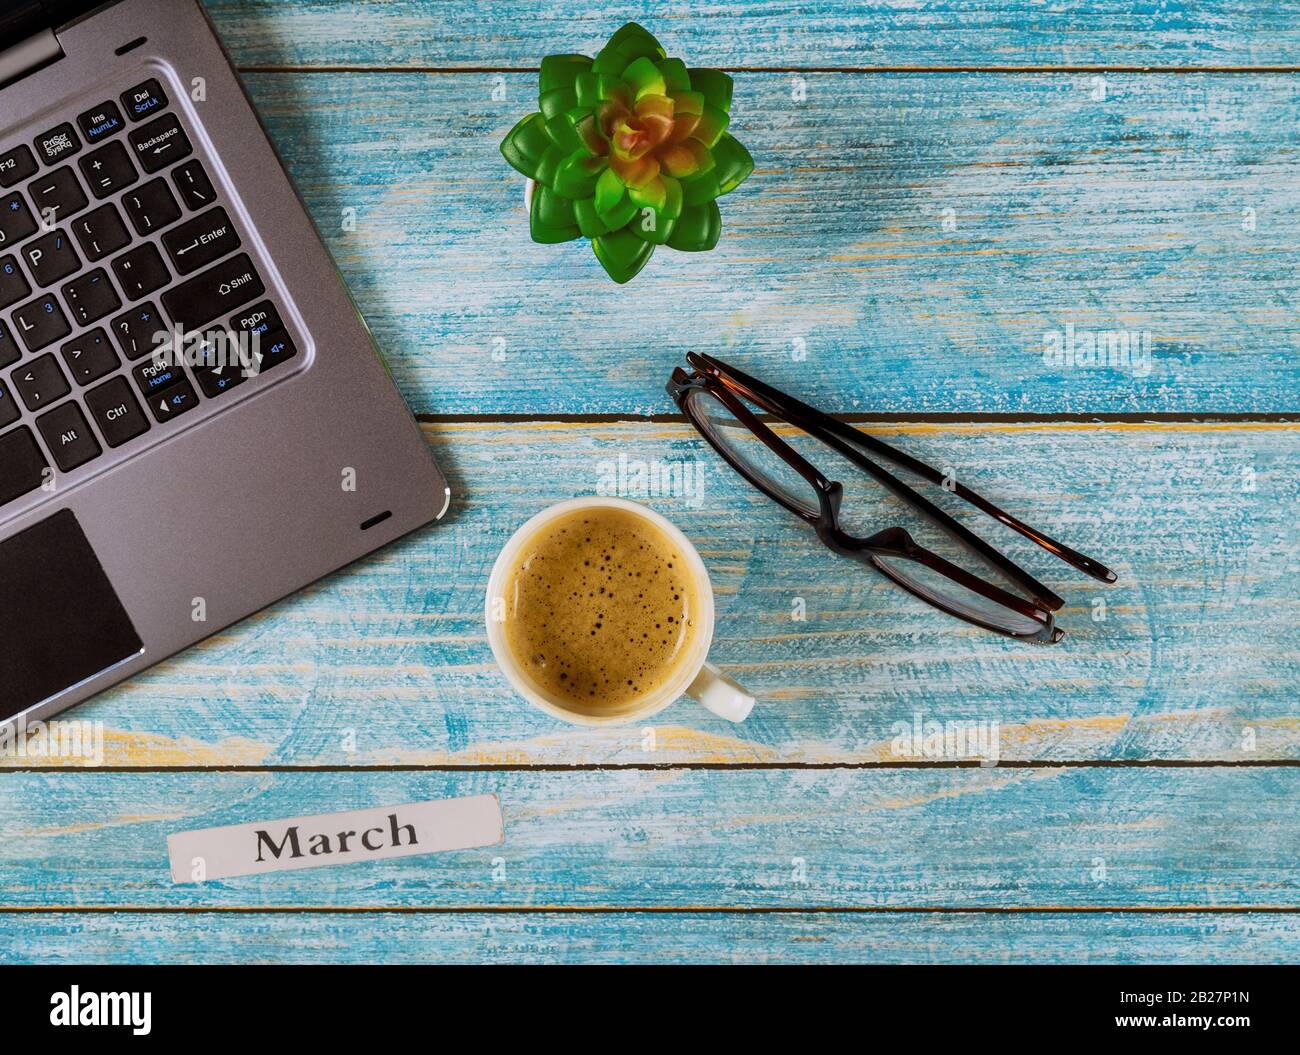 Workspace with March month of calendar year, office table with computer and coffee cup, glasses view Stock Photo